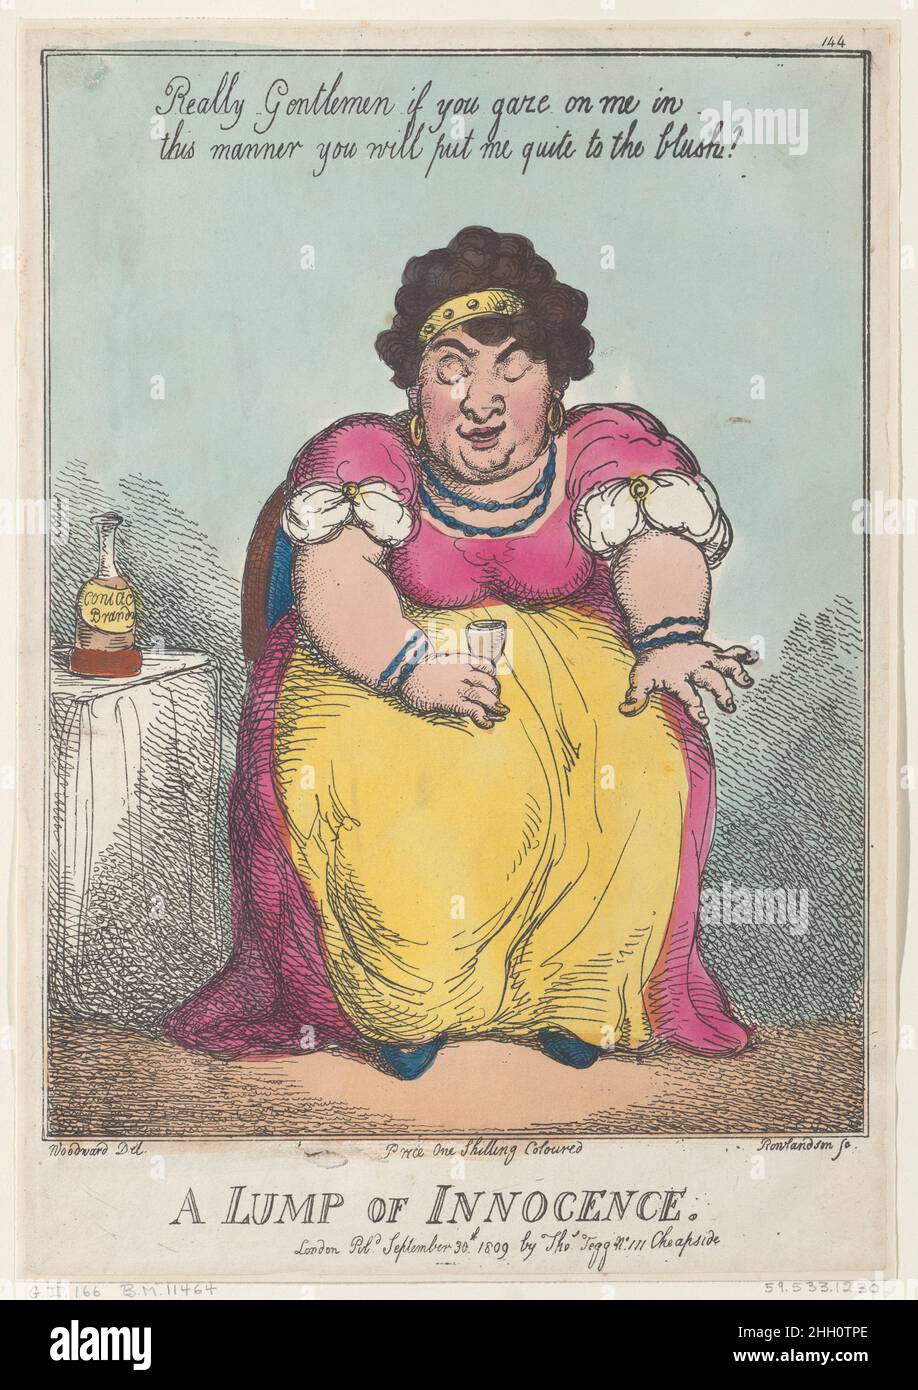 A Lump of Innocence September 30, 1809 Thomas Rowlandson A plump woman seated holding a glass of cognac, with the bottle on the table at left. Above her is inscribed 'Really Gentlemen if you gaze on me in this manner you will put me quite to the blush!'. A Lump of Innocence. Thomas Rowlandson (British, London 1757–1827 London). September 30, 1809. Hand-colored etching. Thomas Tegg (British, 1776–1846). Prints Stock Photo